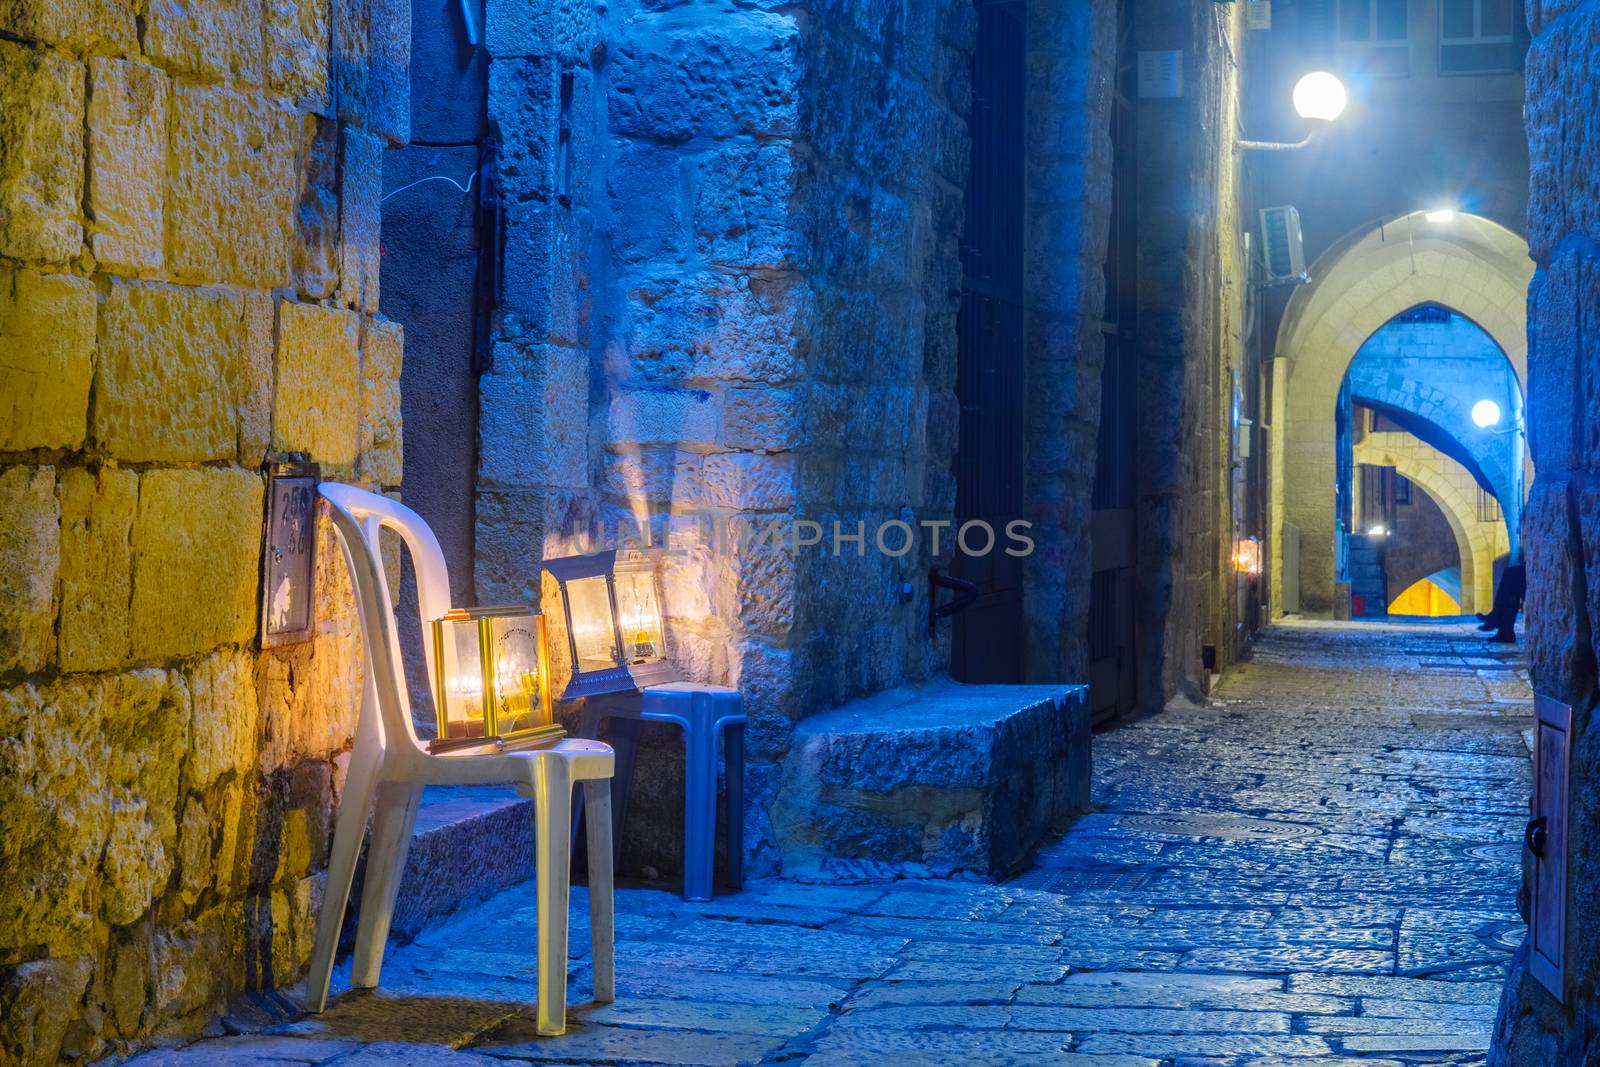 JERUSALEM, ISRAEL - DECEMBER 29, 2016: Alley with a display of Traditional Menorahs (Hanukkah Lamps) with olive oil candles, in the Jewish quarter, Jerusalem Old City, Israel